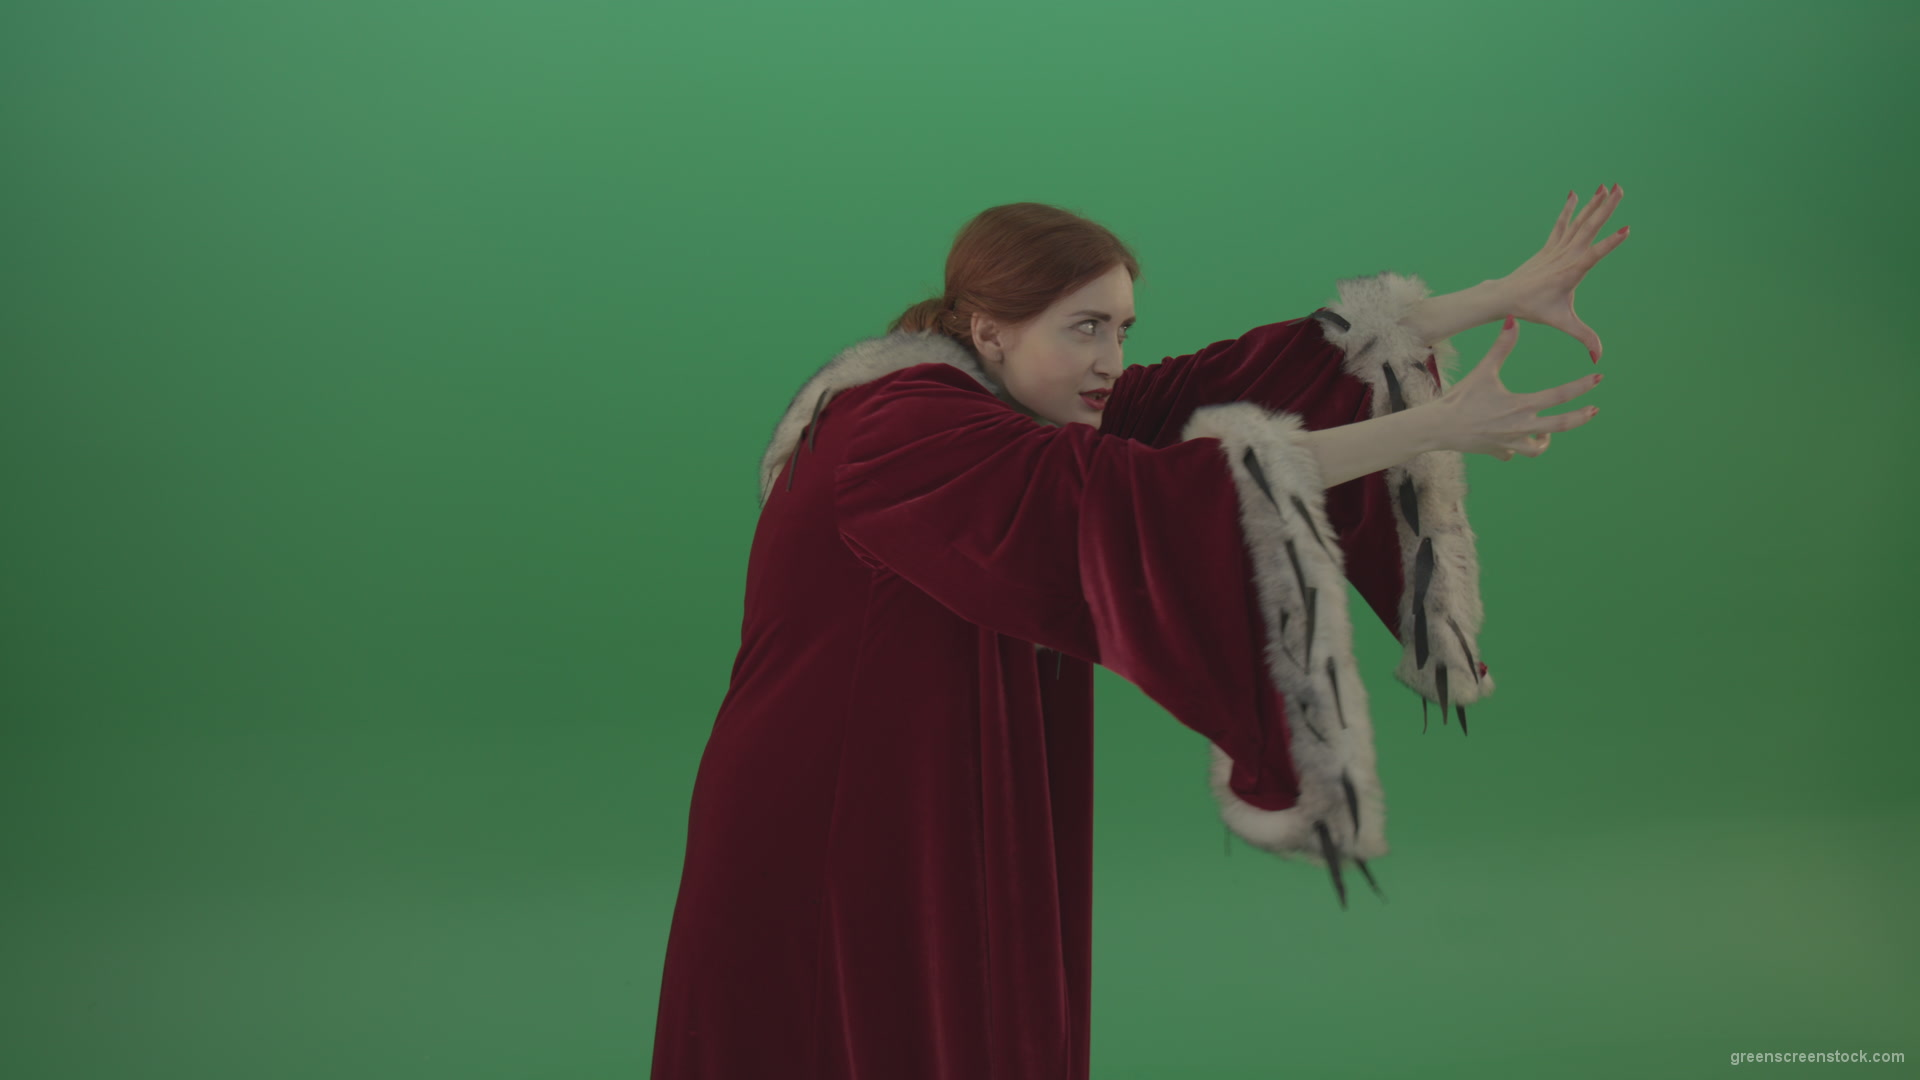 Girl-is-dressed-in-a-red-cloak-shoots-proton-lasers-_005 Green Screen Stock